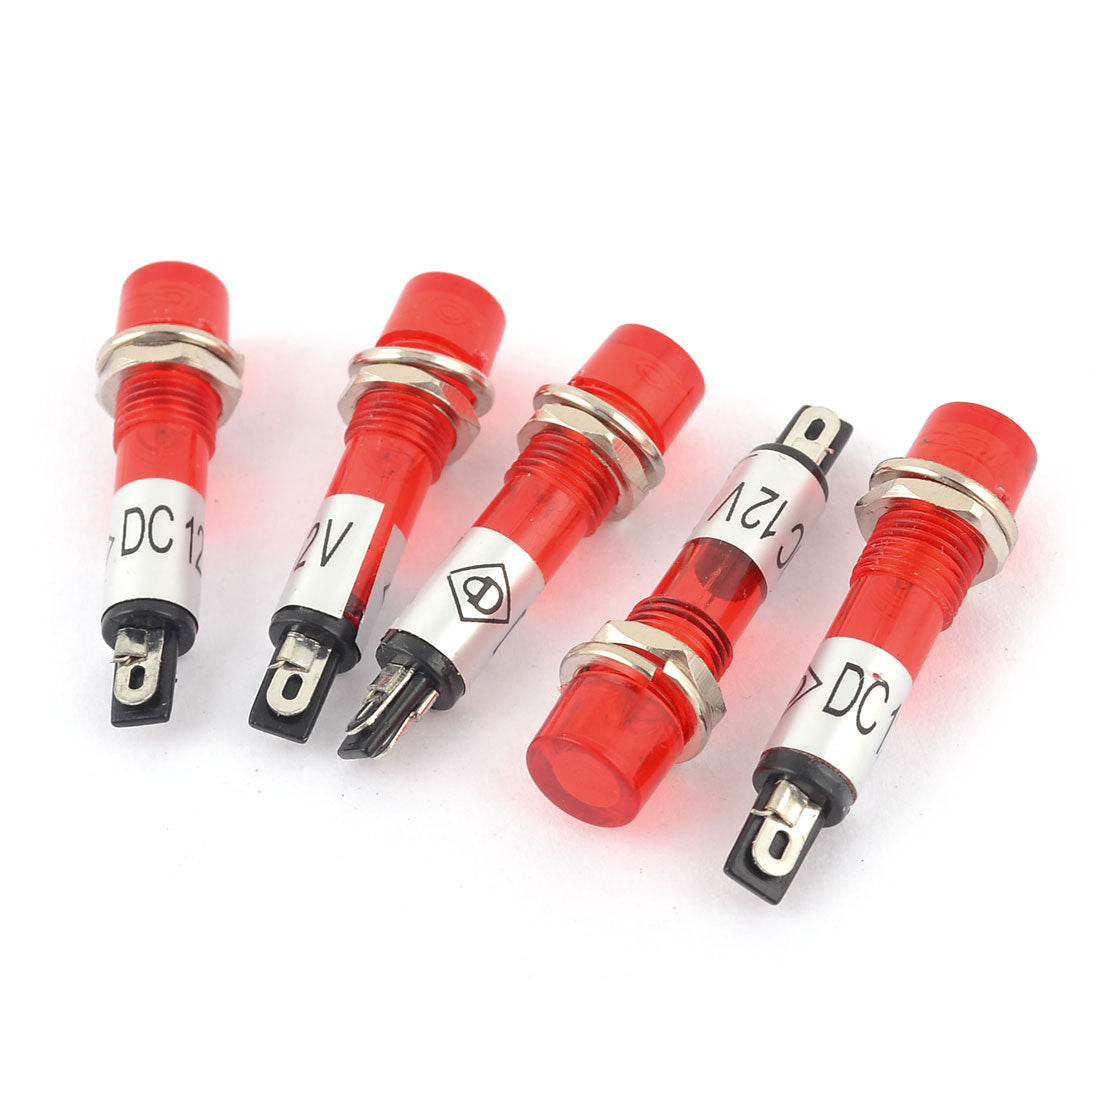 uxcell Uxcell 5 Pcs AC DC 12V 7mm Red Bulb Power Signal Indicator Pilot Light Lamp